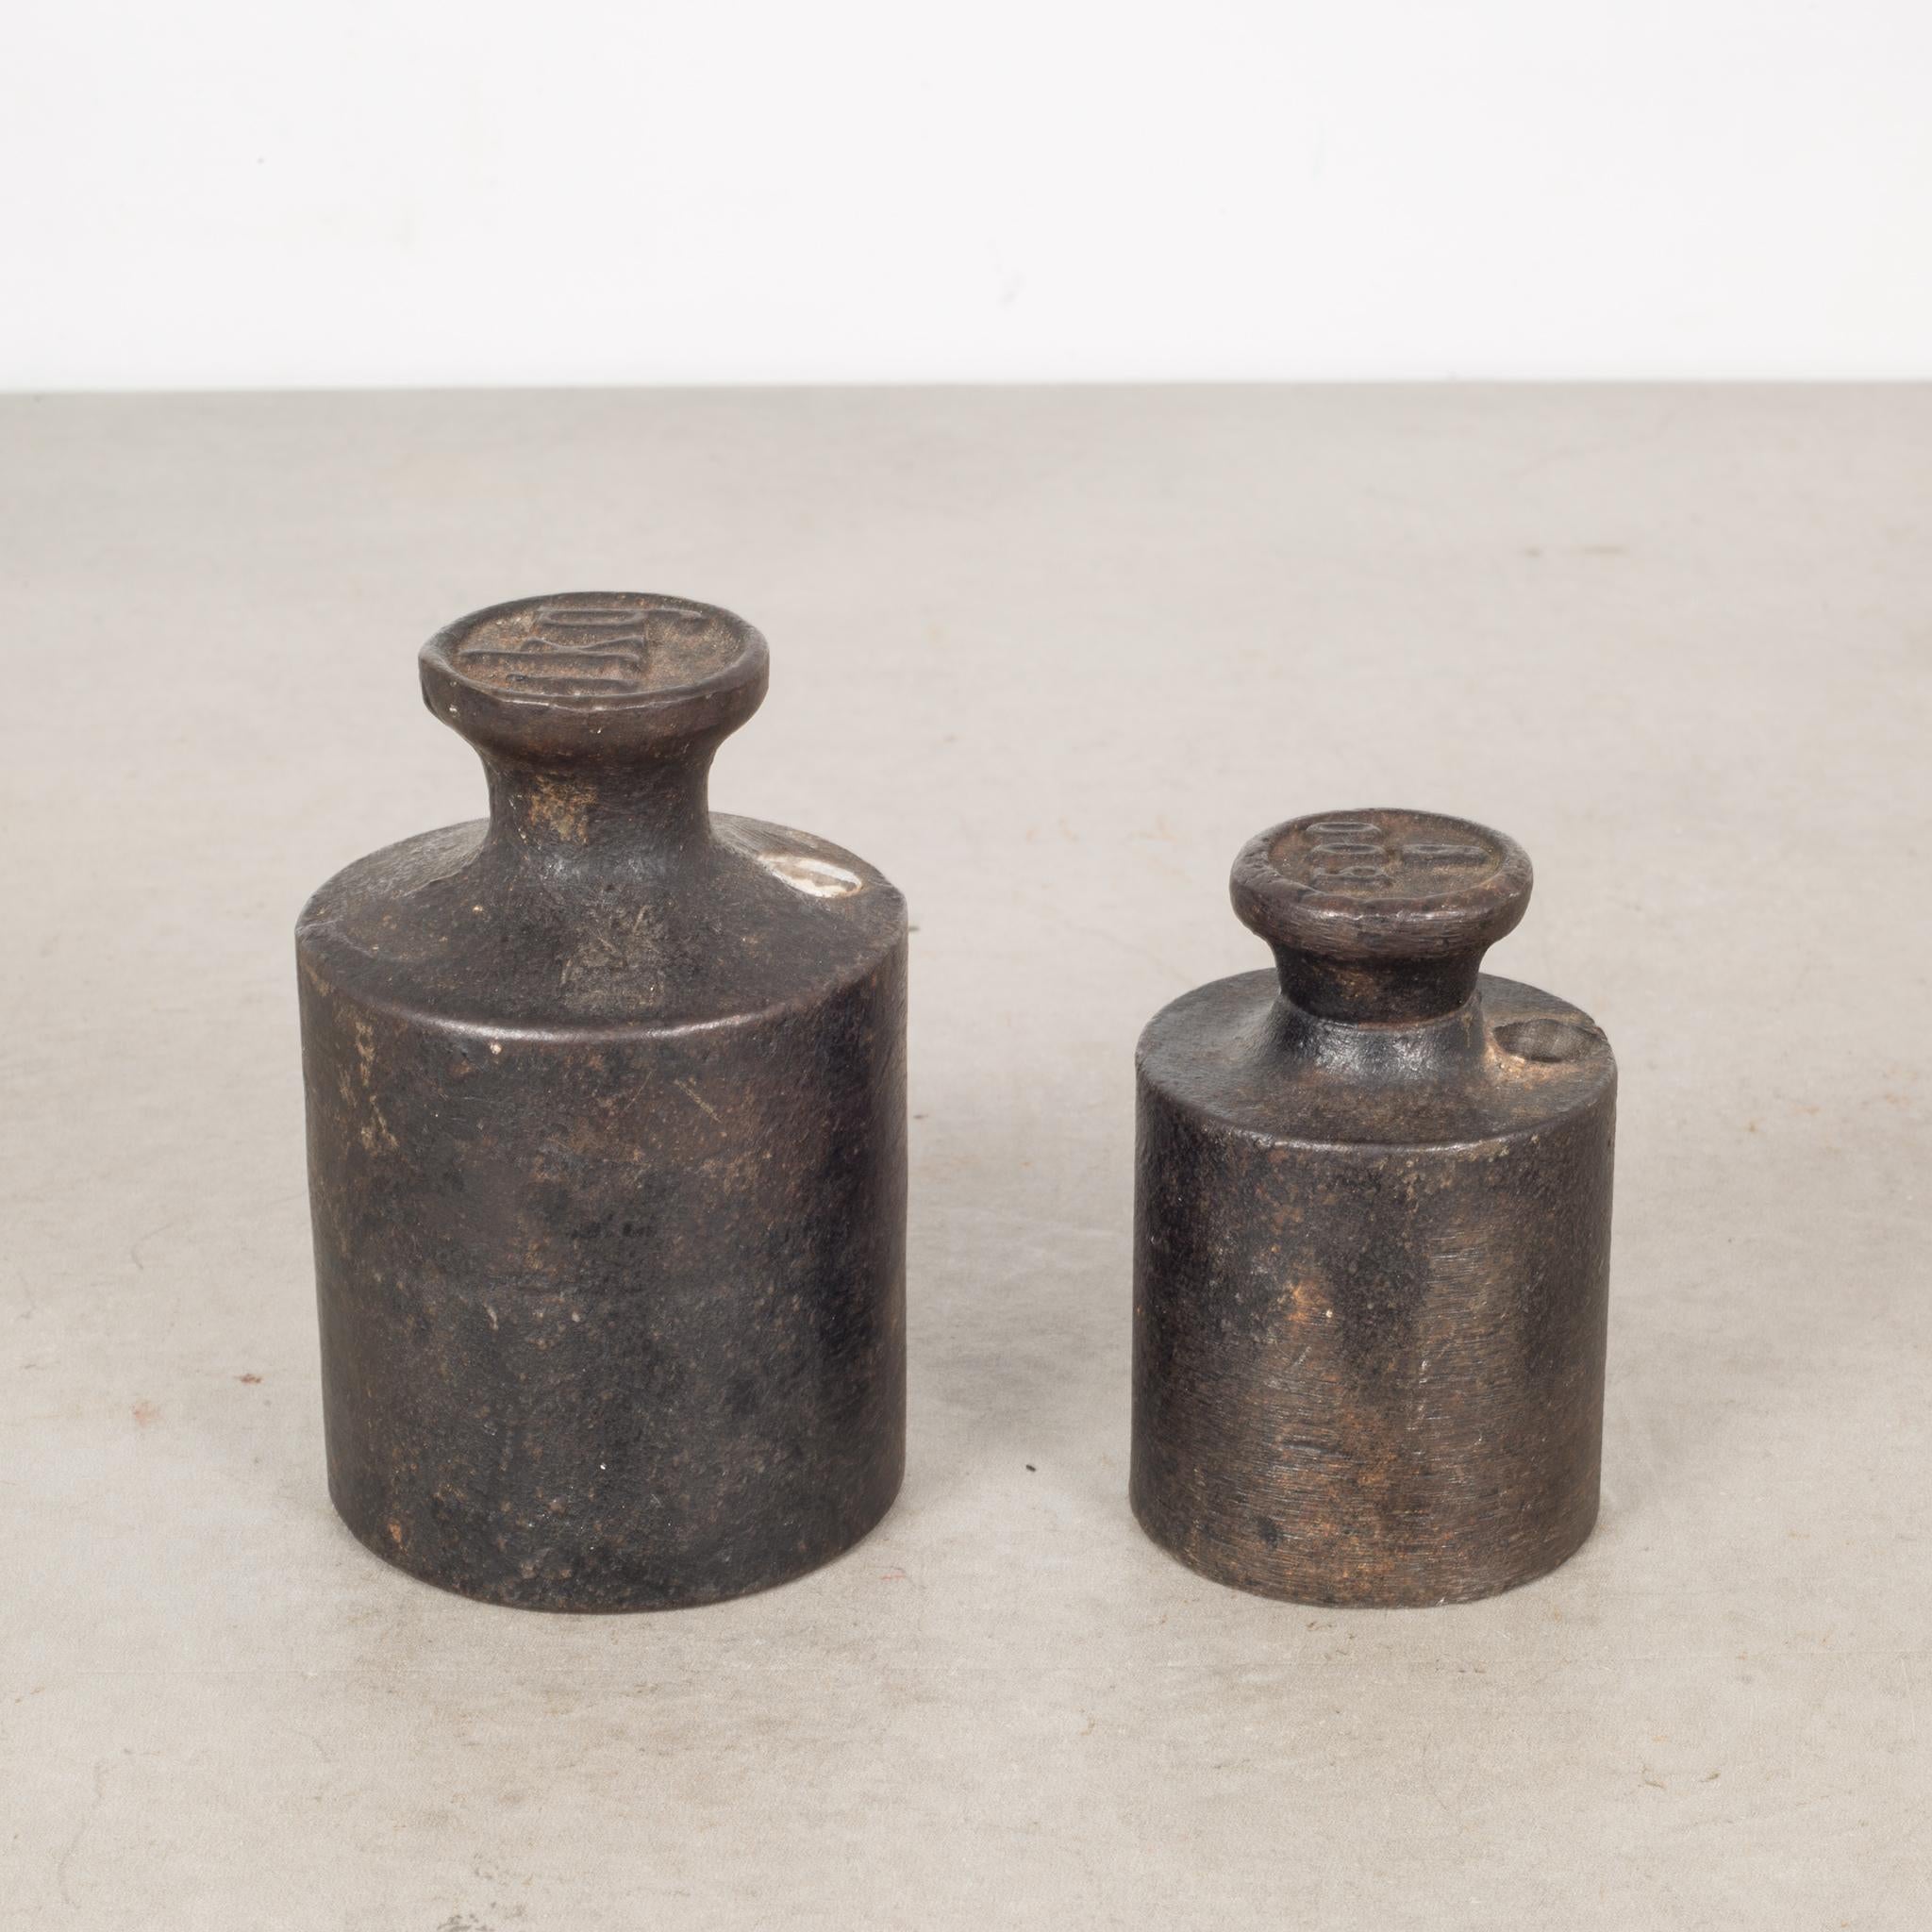 American Solid Steel Weights, circa 1880-1920